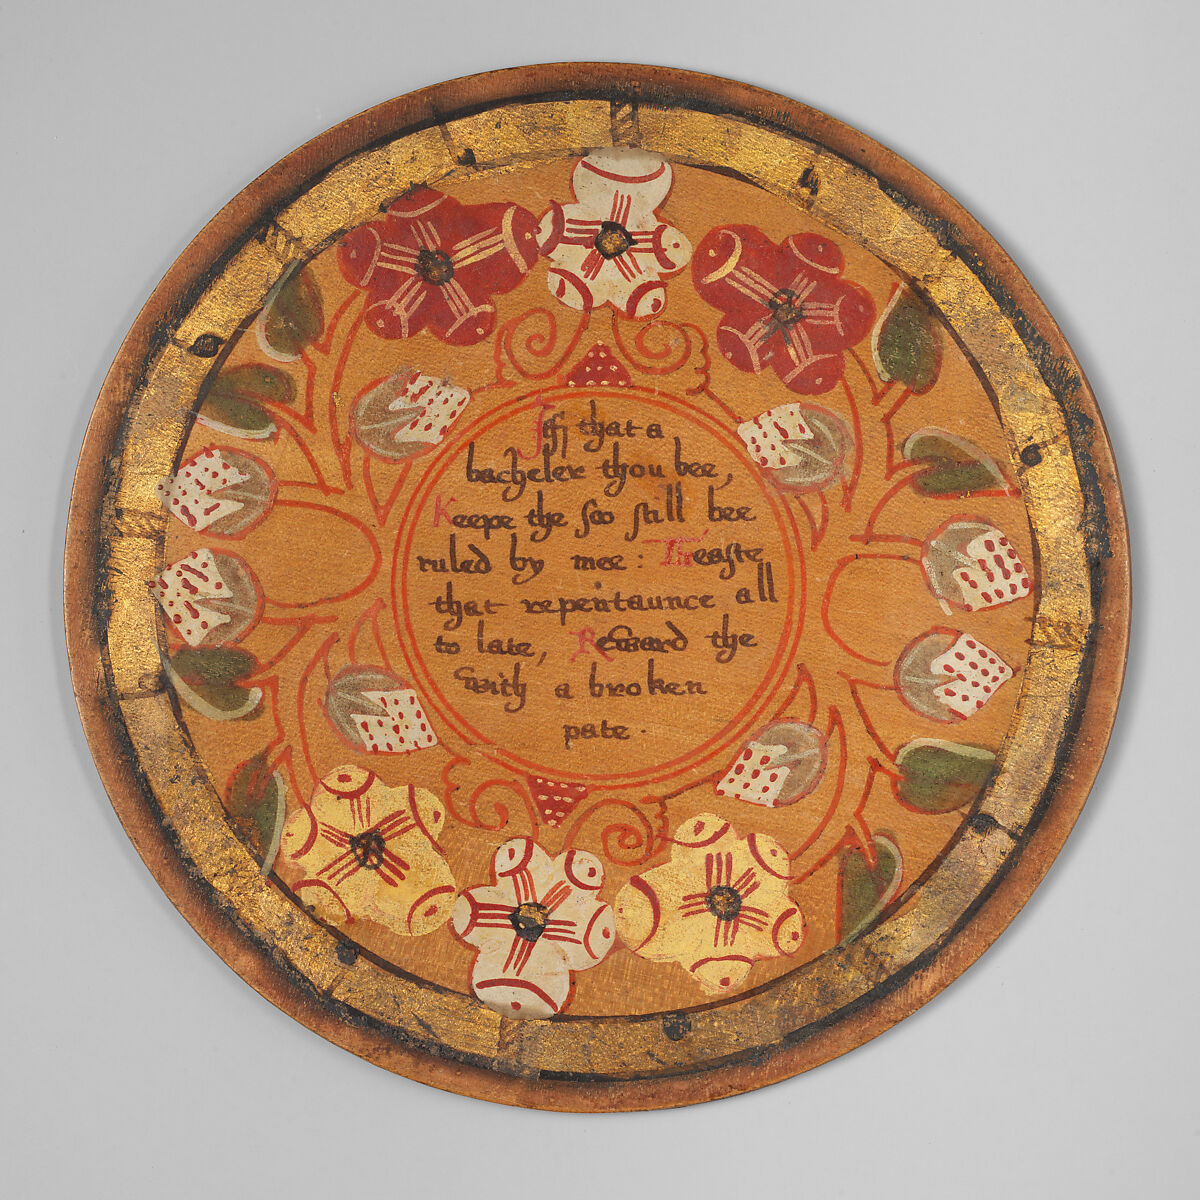 Trencher (one of a set), Oak and sycamore woods, painted, silvered and yellow varnished; inscription: ink (animal or vegetable), British 